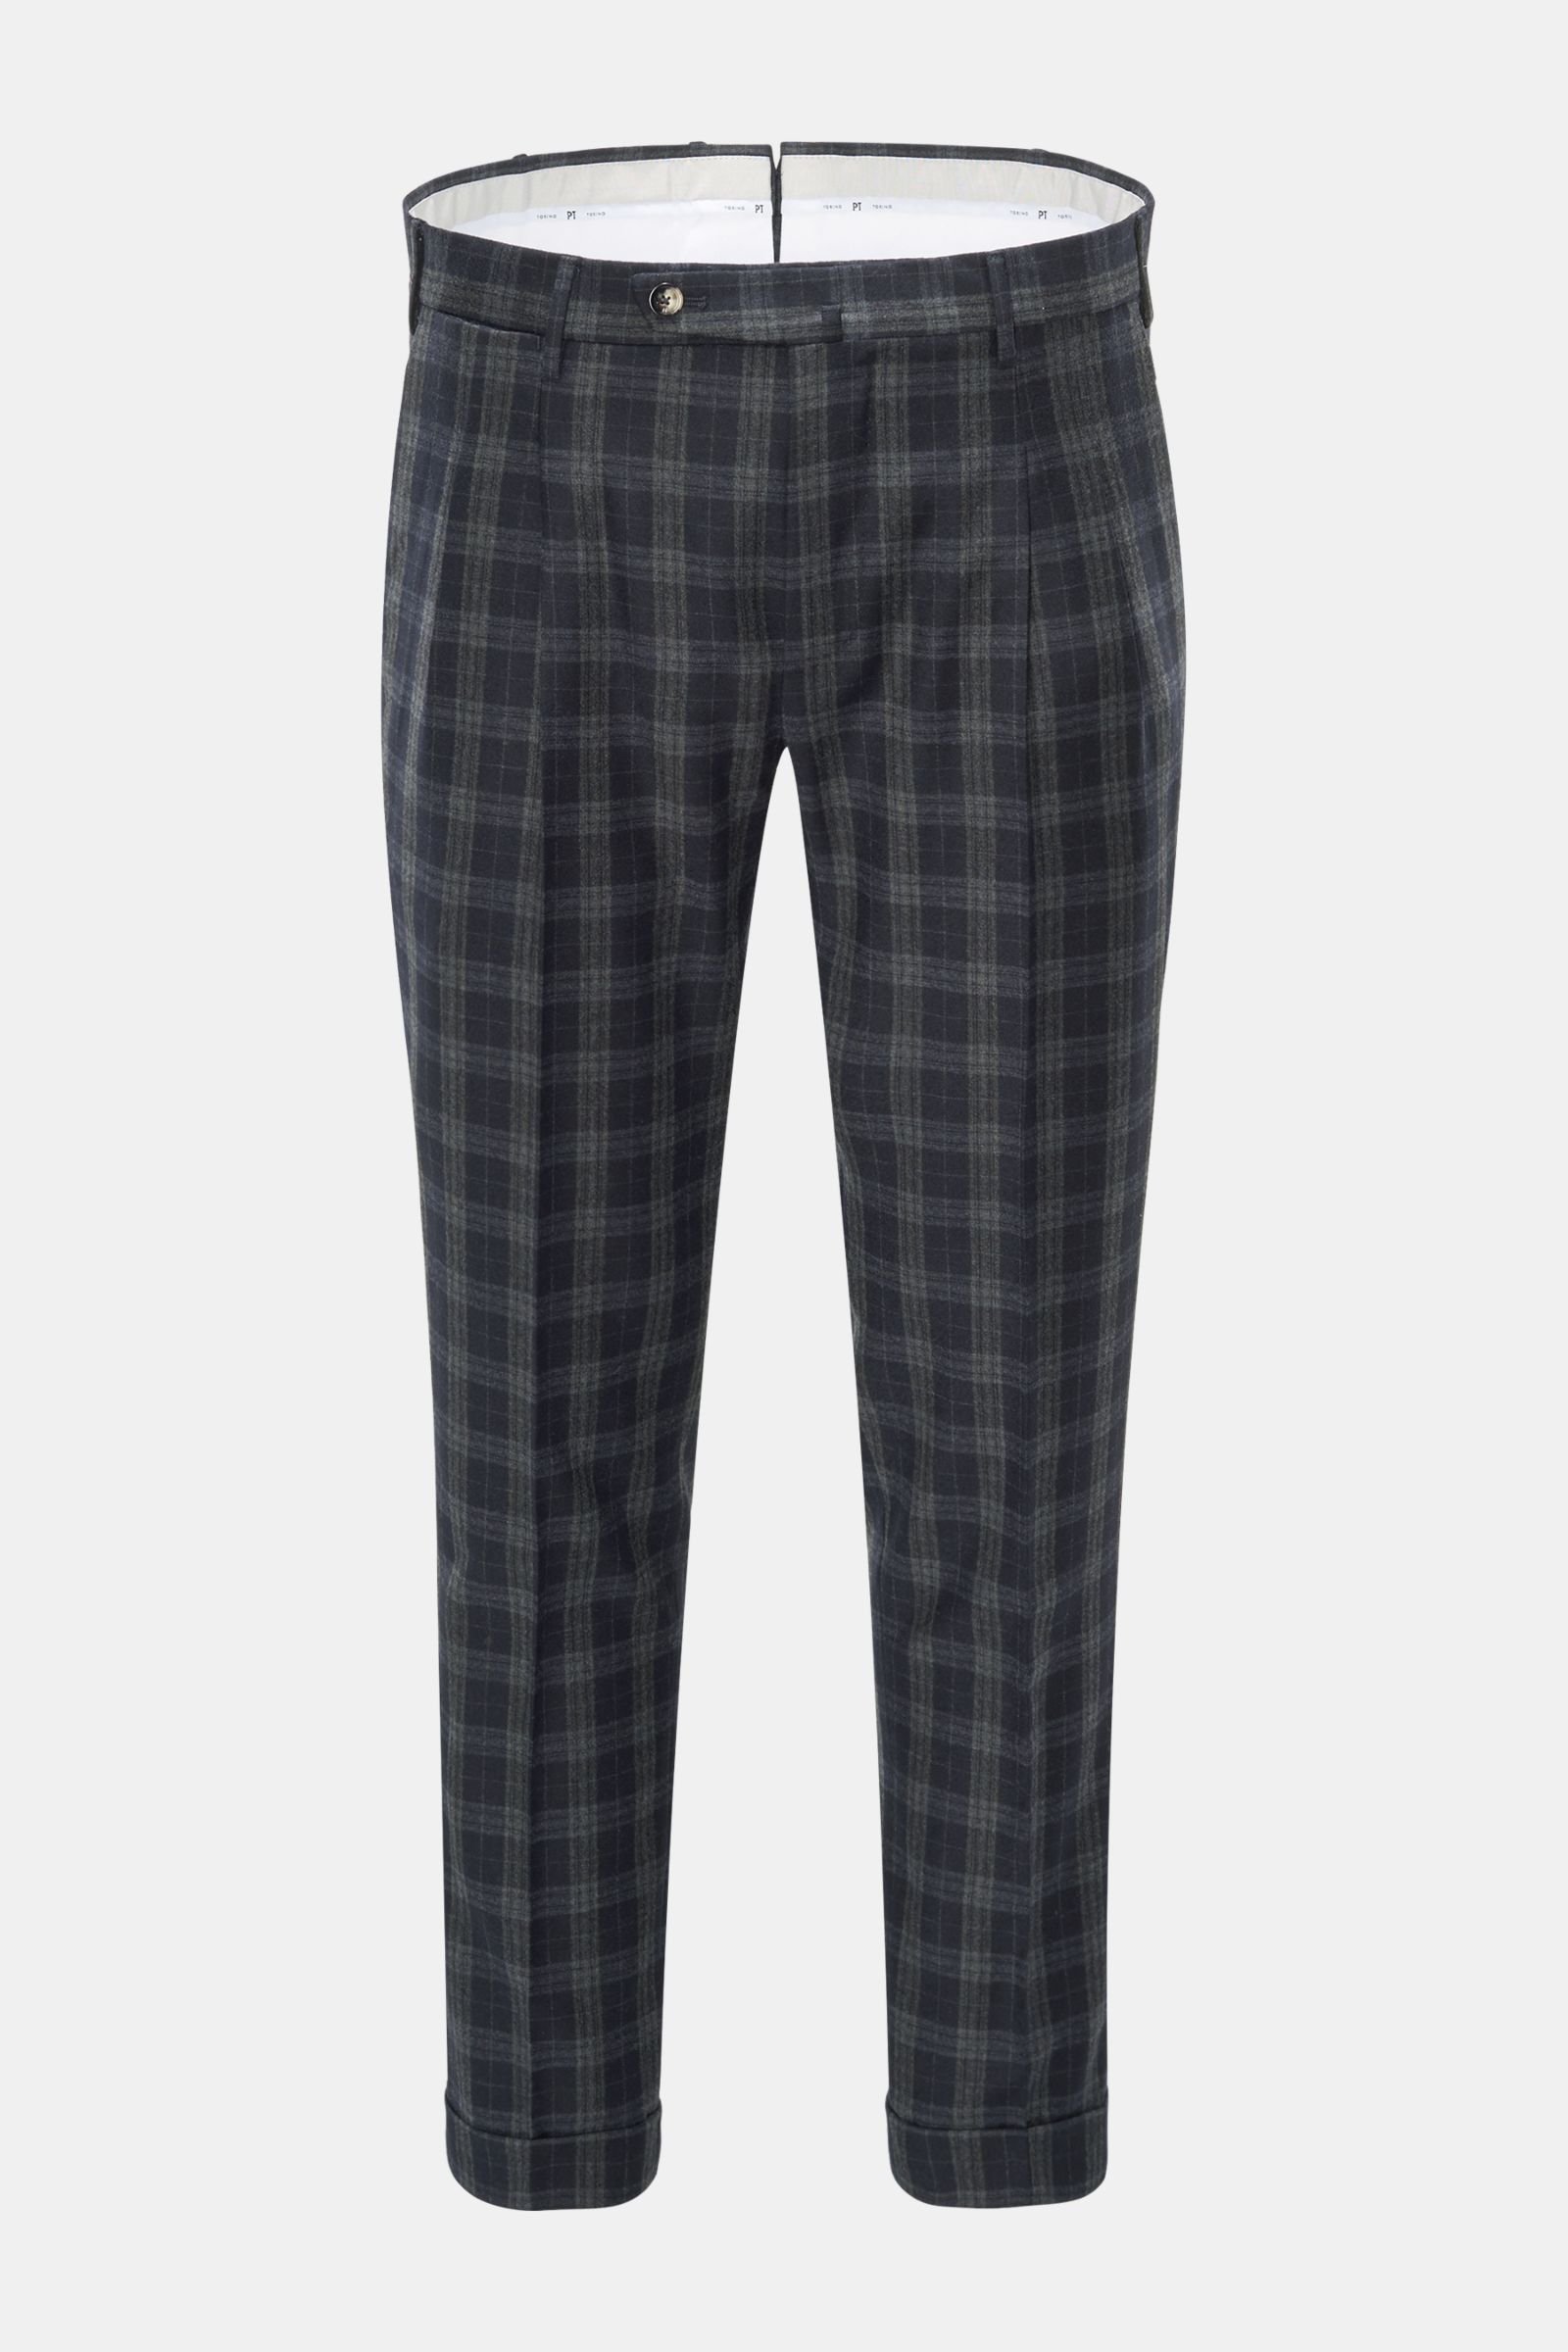 Wool trousers 'Preppy Fit' navy/dark grey checked